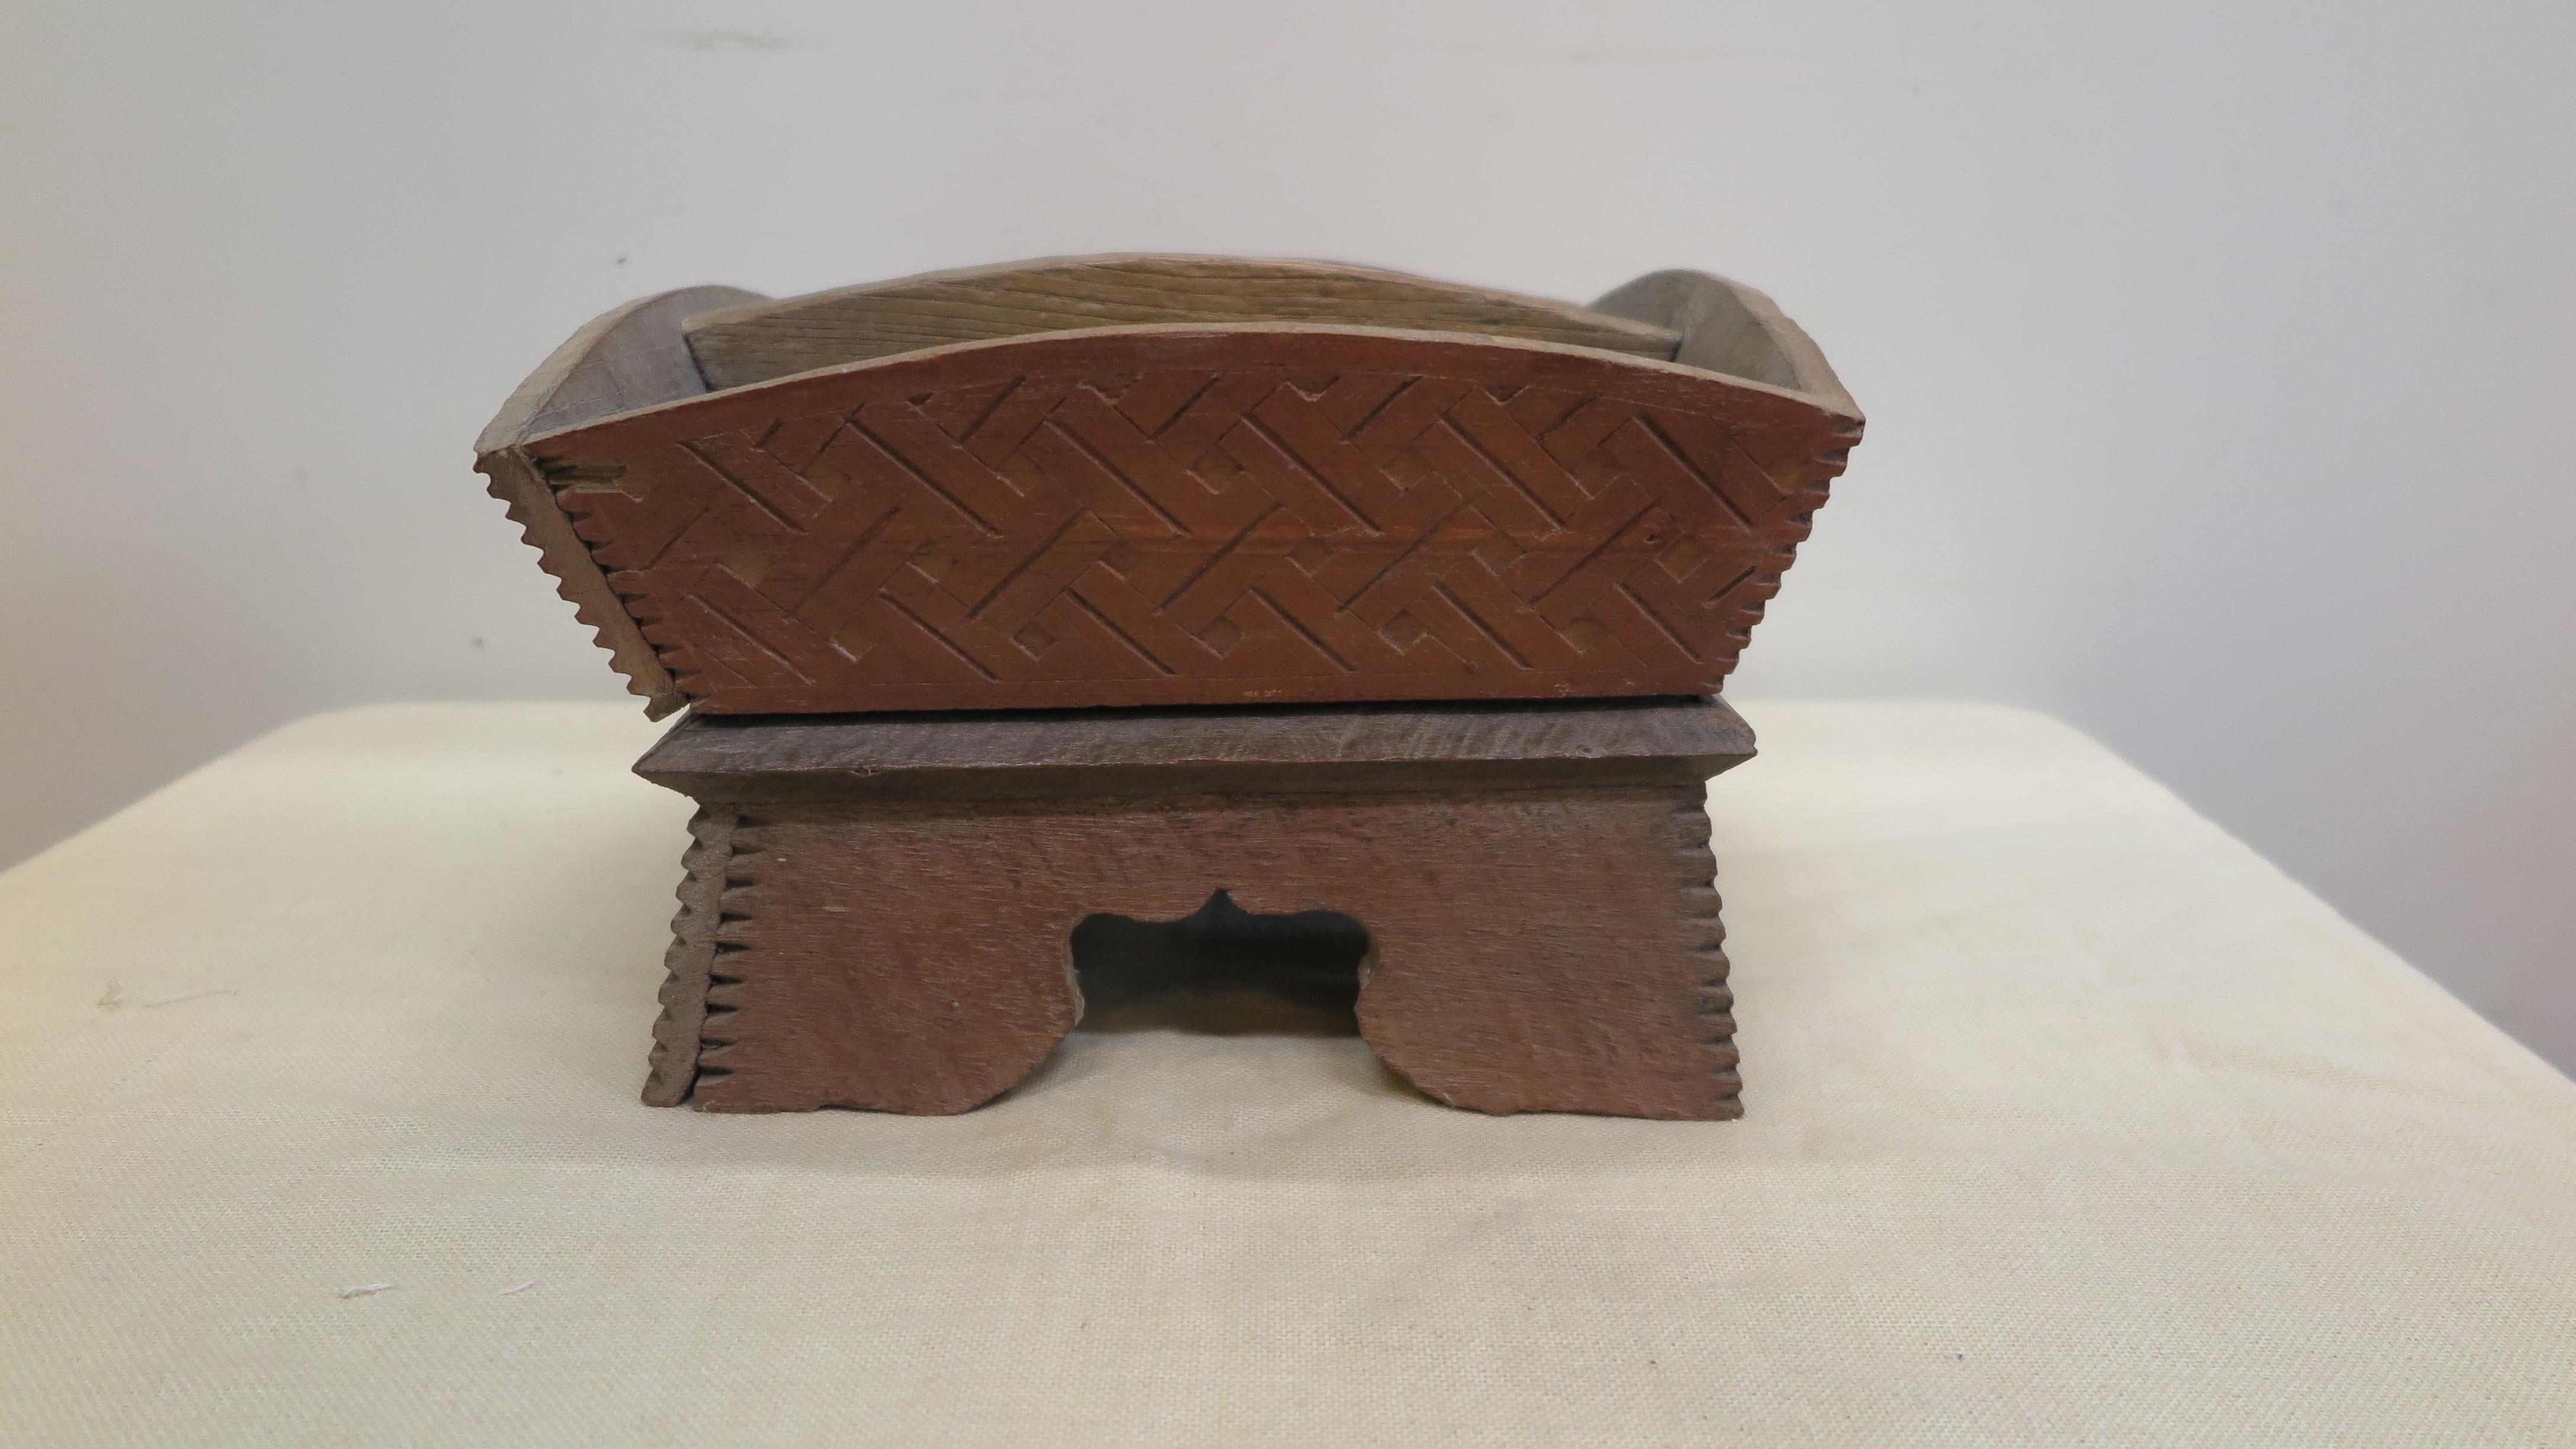 A betel nut box. Hill Tribe Betel Nut Box, from the Hill Tribes that live amongst Thailand and Loa borders in the mountain hills. Hand made of hard wood with geometric incised carved decoration. A beautiful tribal folk art box originally used in the